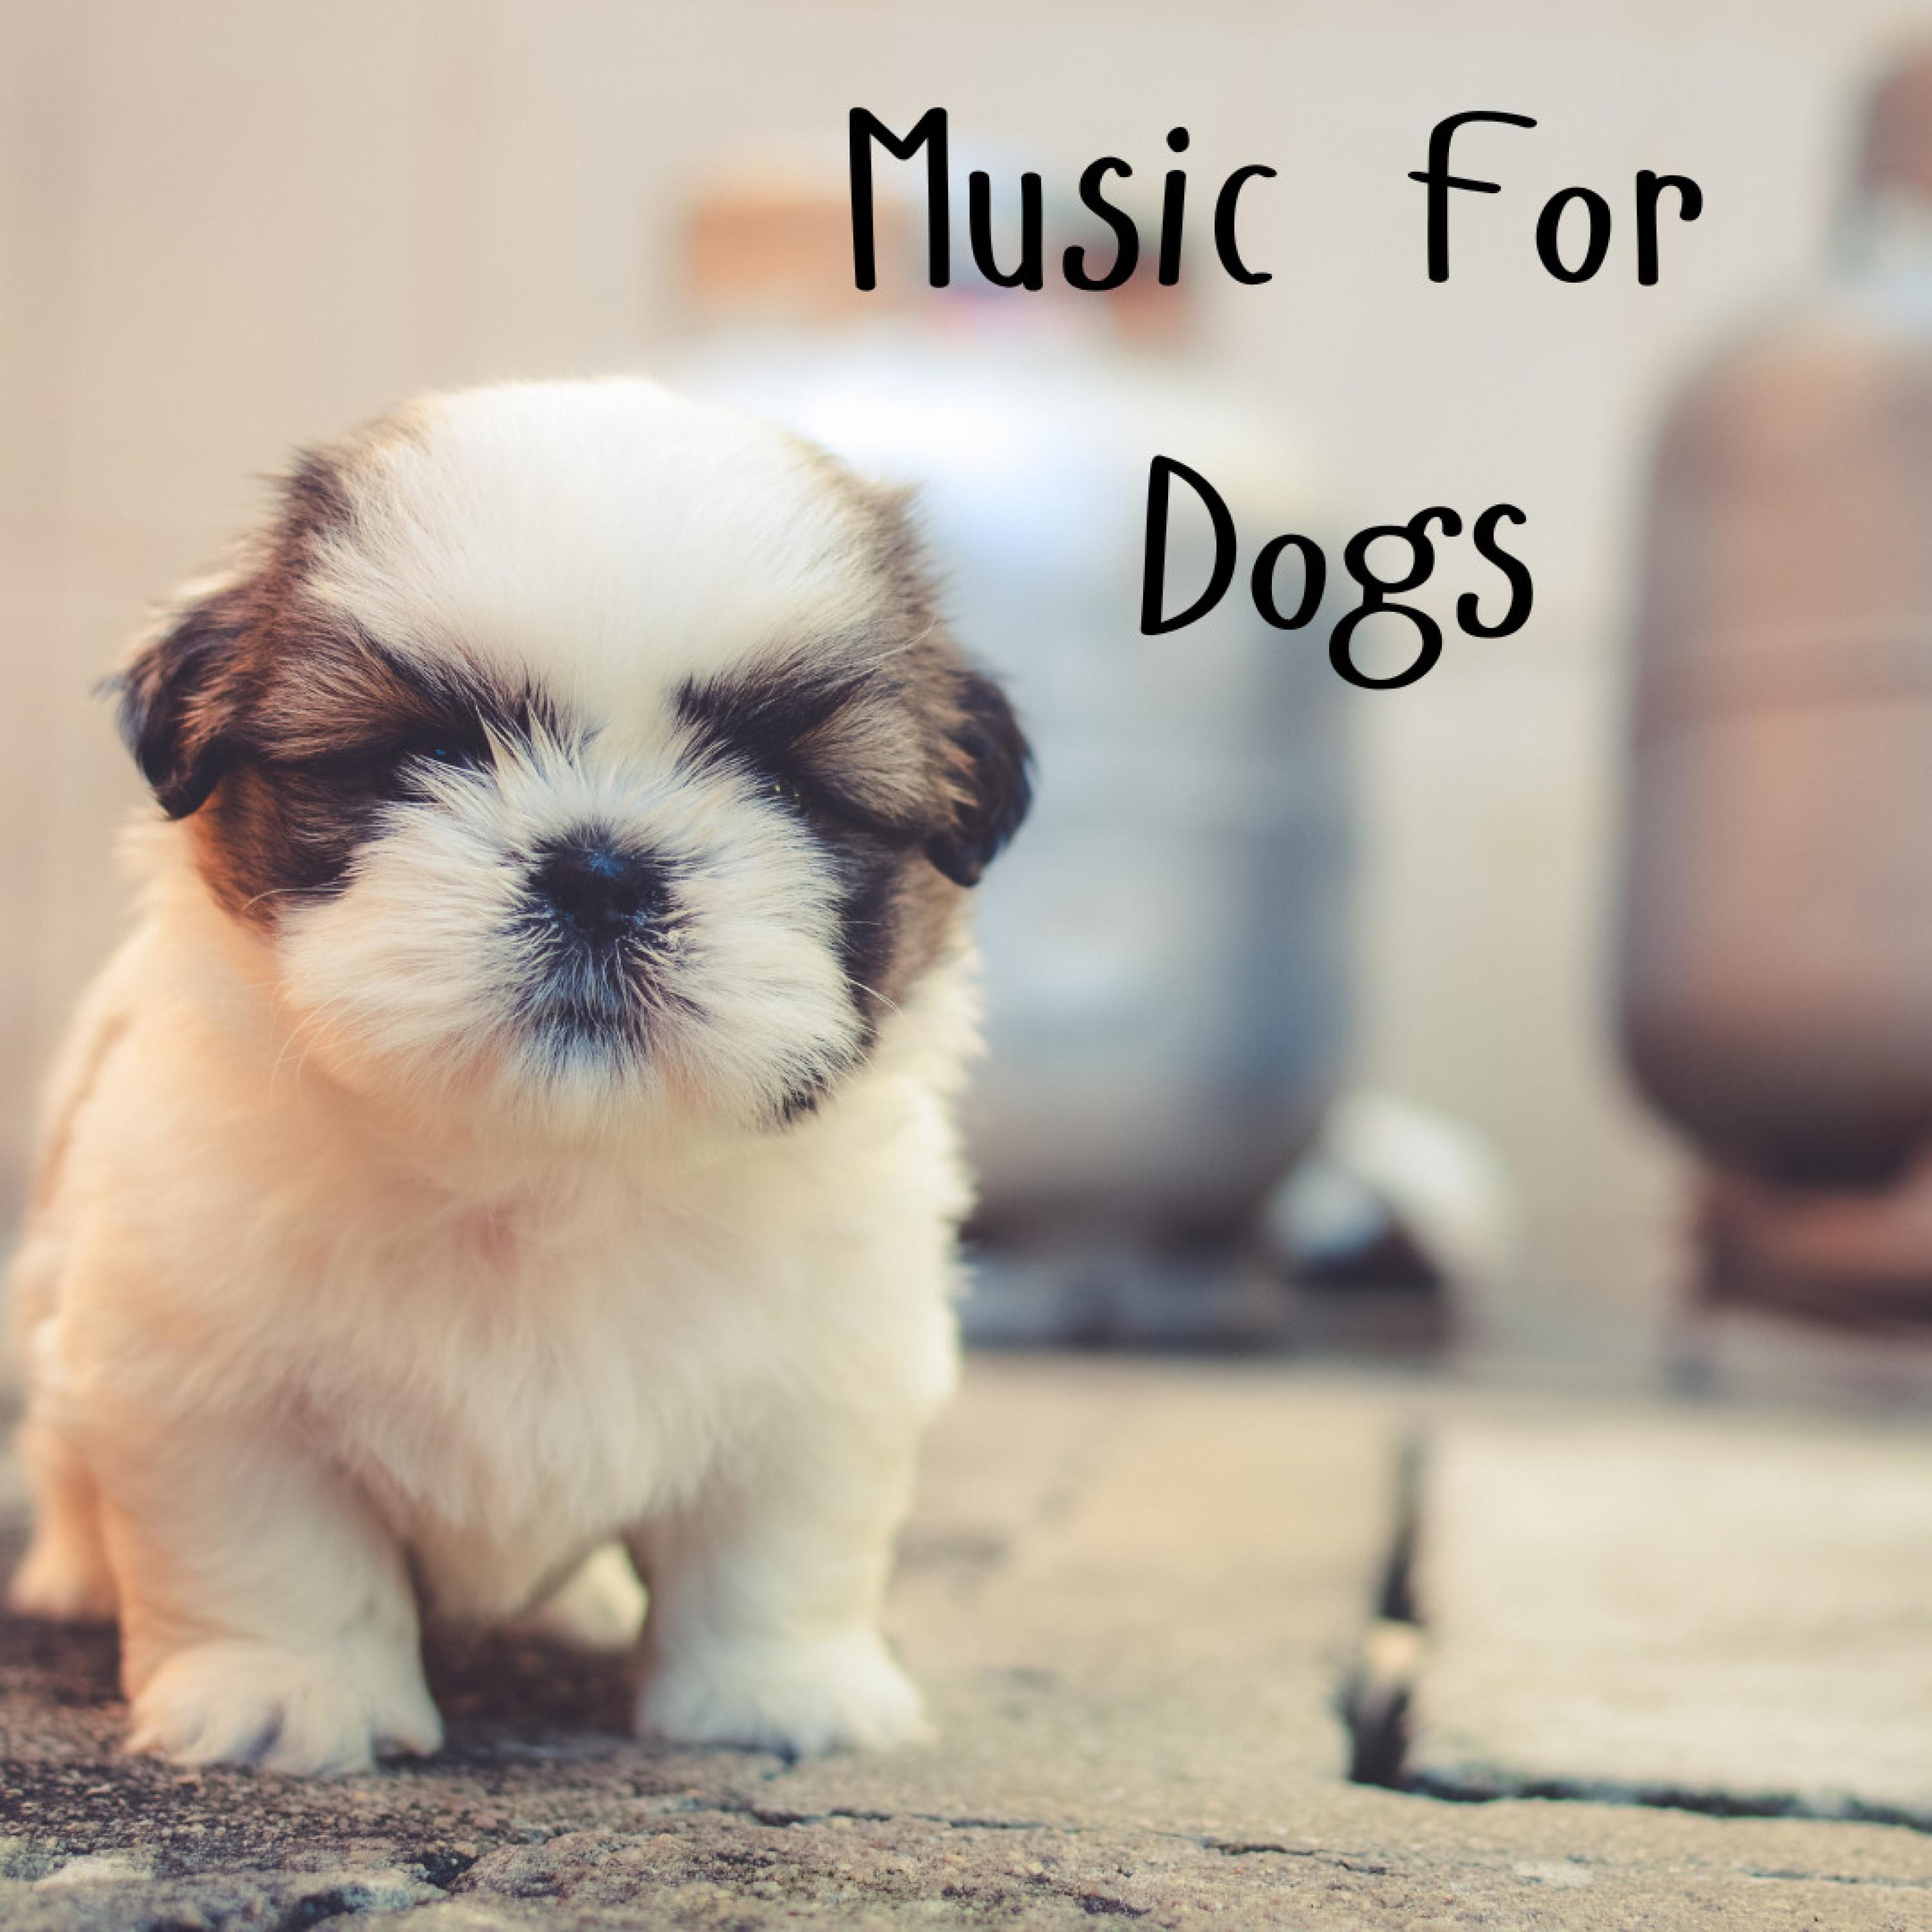 Music For Dogs - Music for Pets